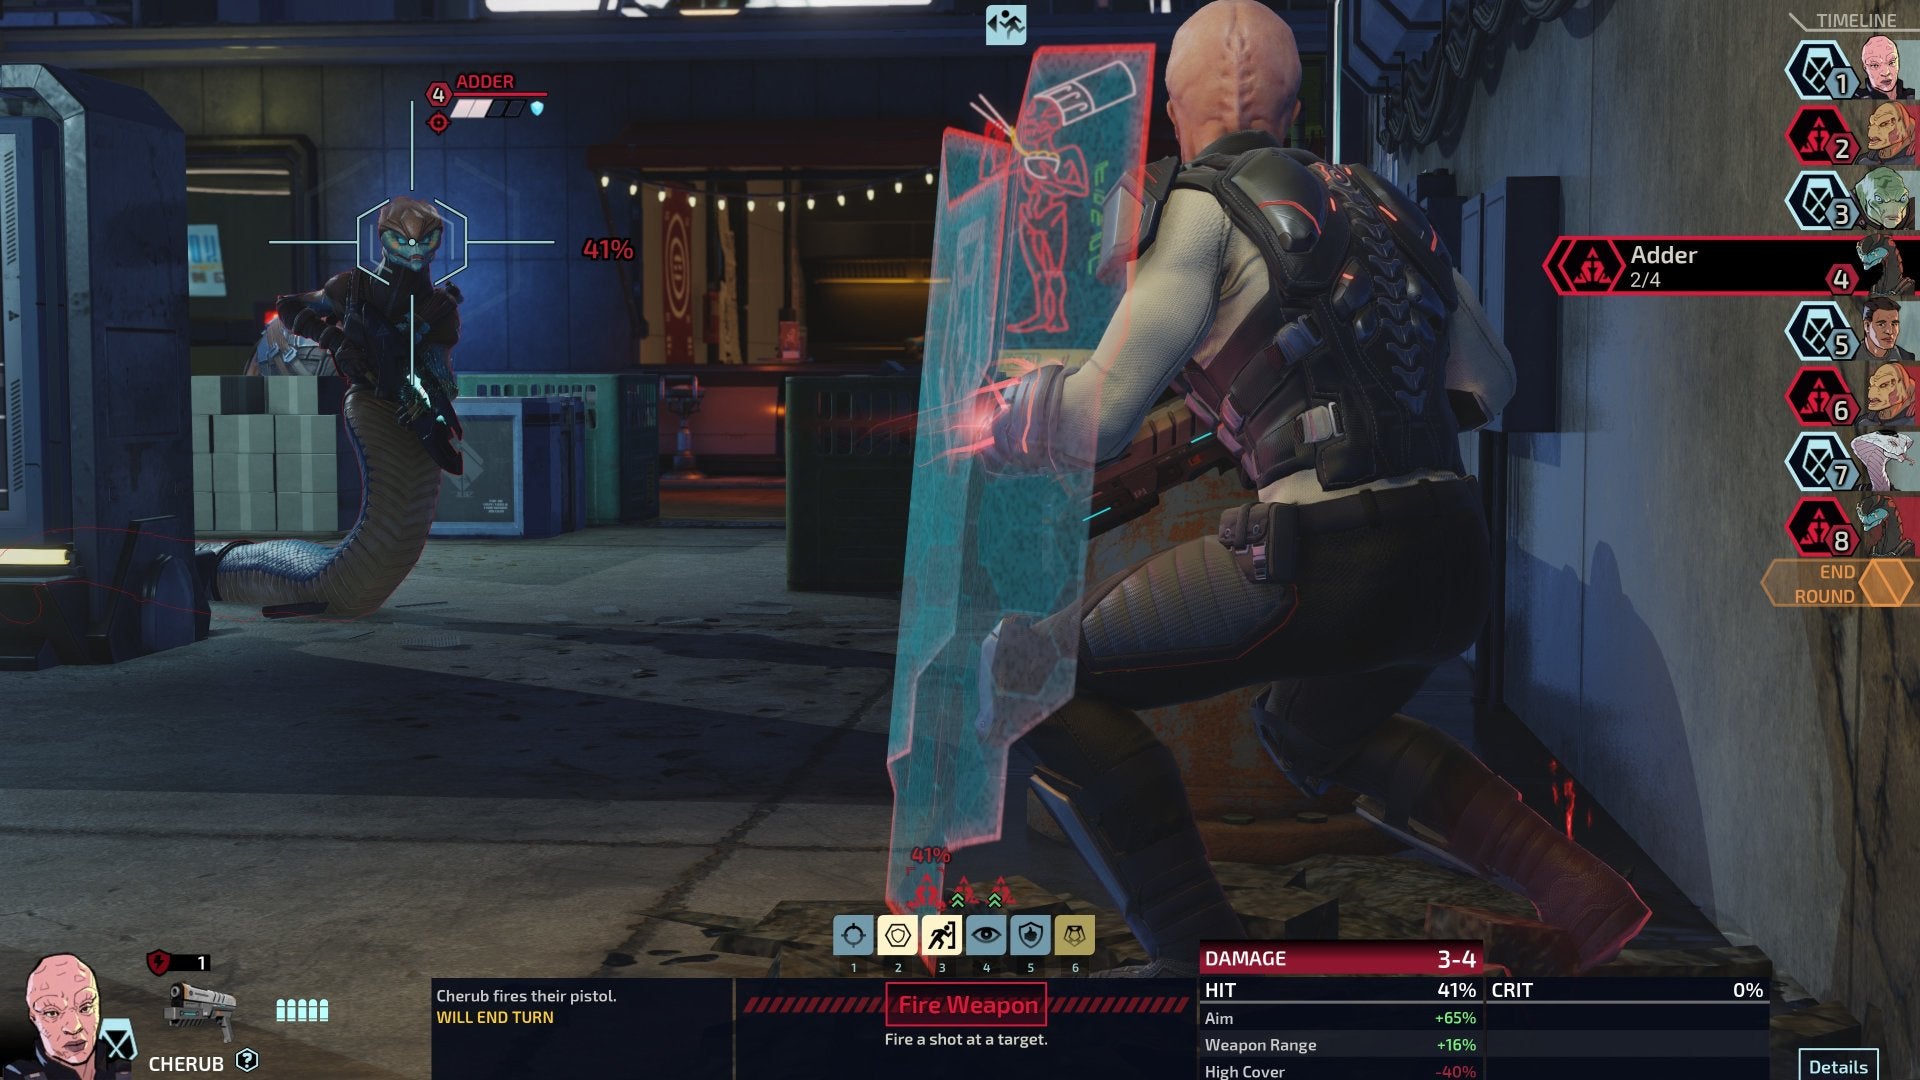 Image for See the surprise XCOM game Chimera Squad in action